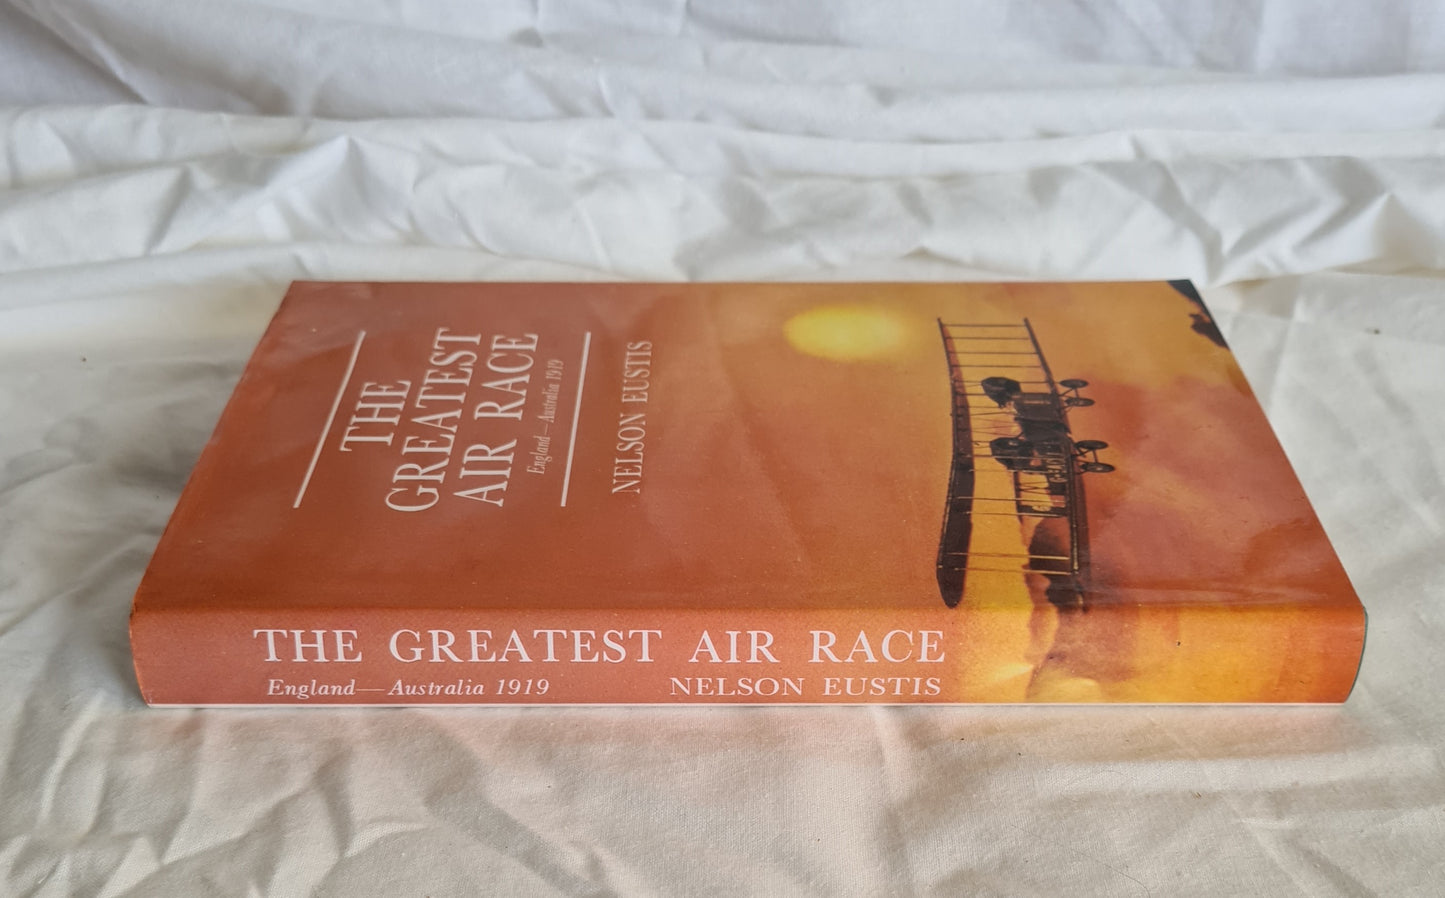 The Greatest Air Race by Nelson Eustis